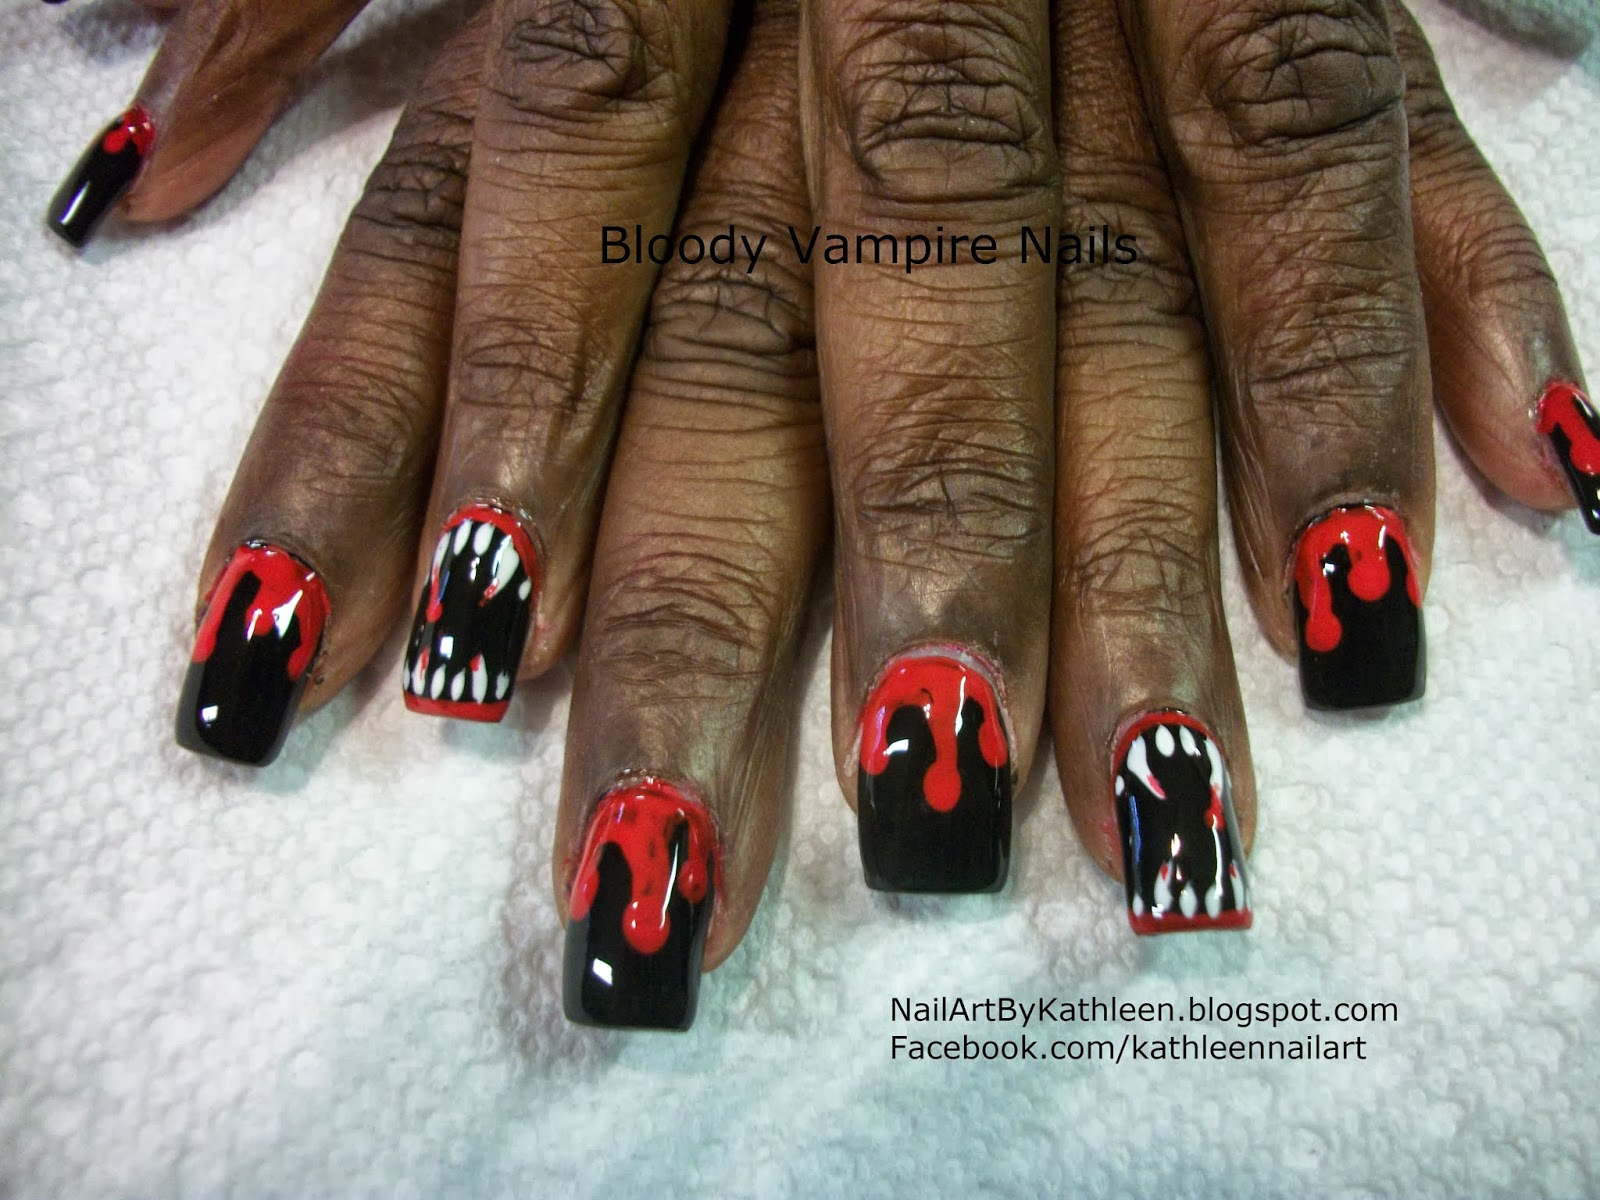 4. Bloody Vampire Nails - wide 3